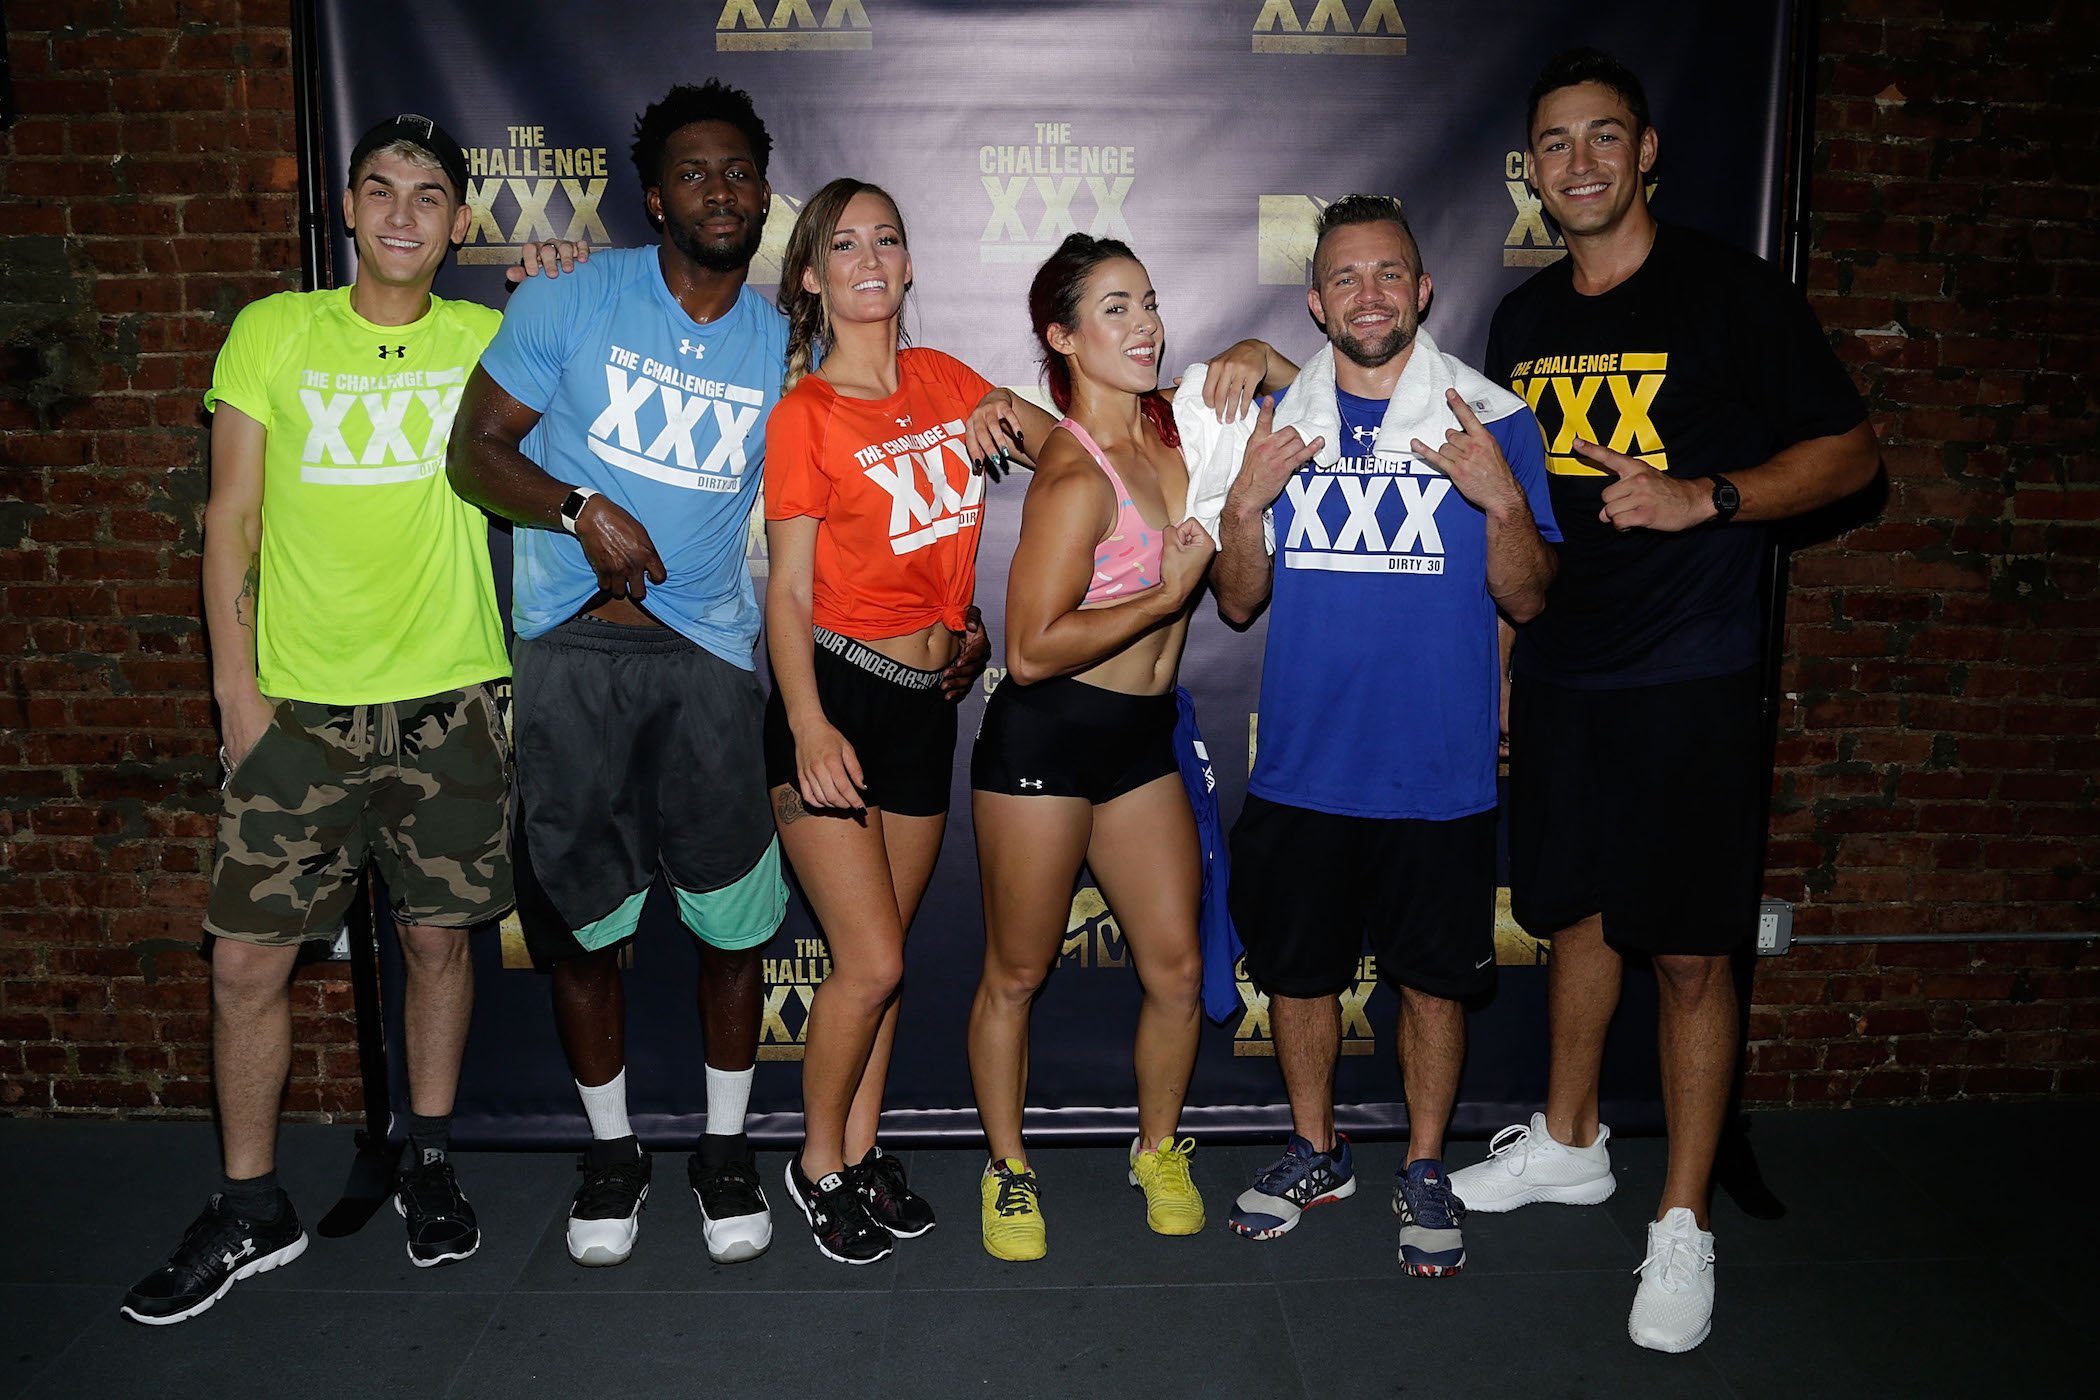 Shane Raines, Derrick Henry, Ashley Mitchell, Cara Maria Sorbello, Derrick Kosinski, and Tony Raines from MTV's 'The Challenge' standing together and smiling